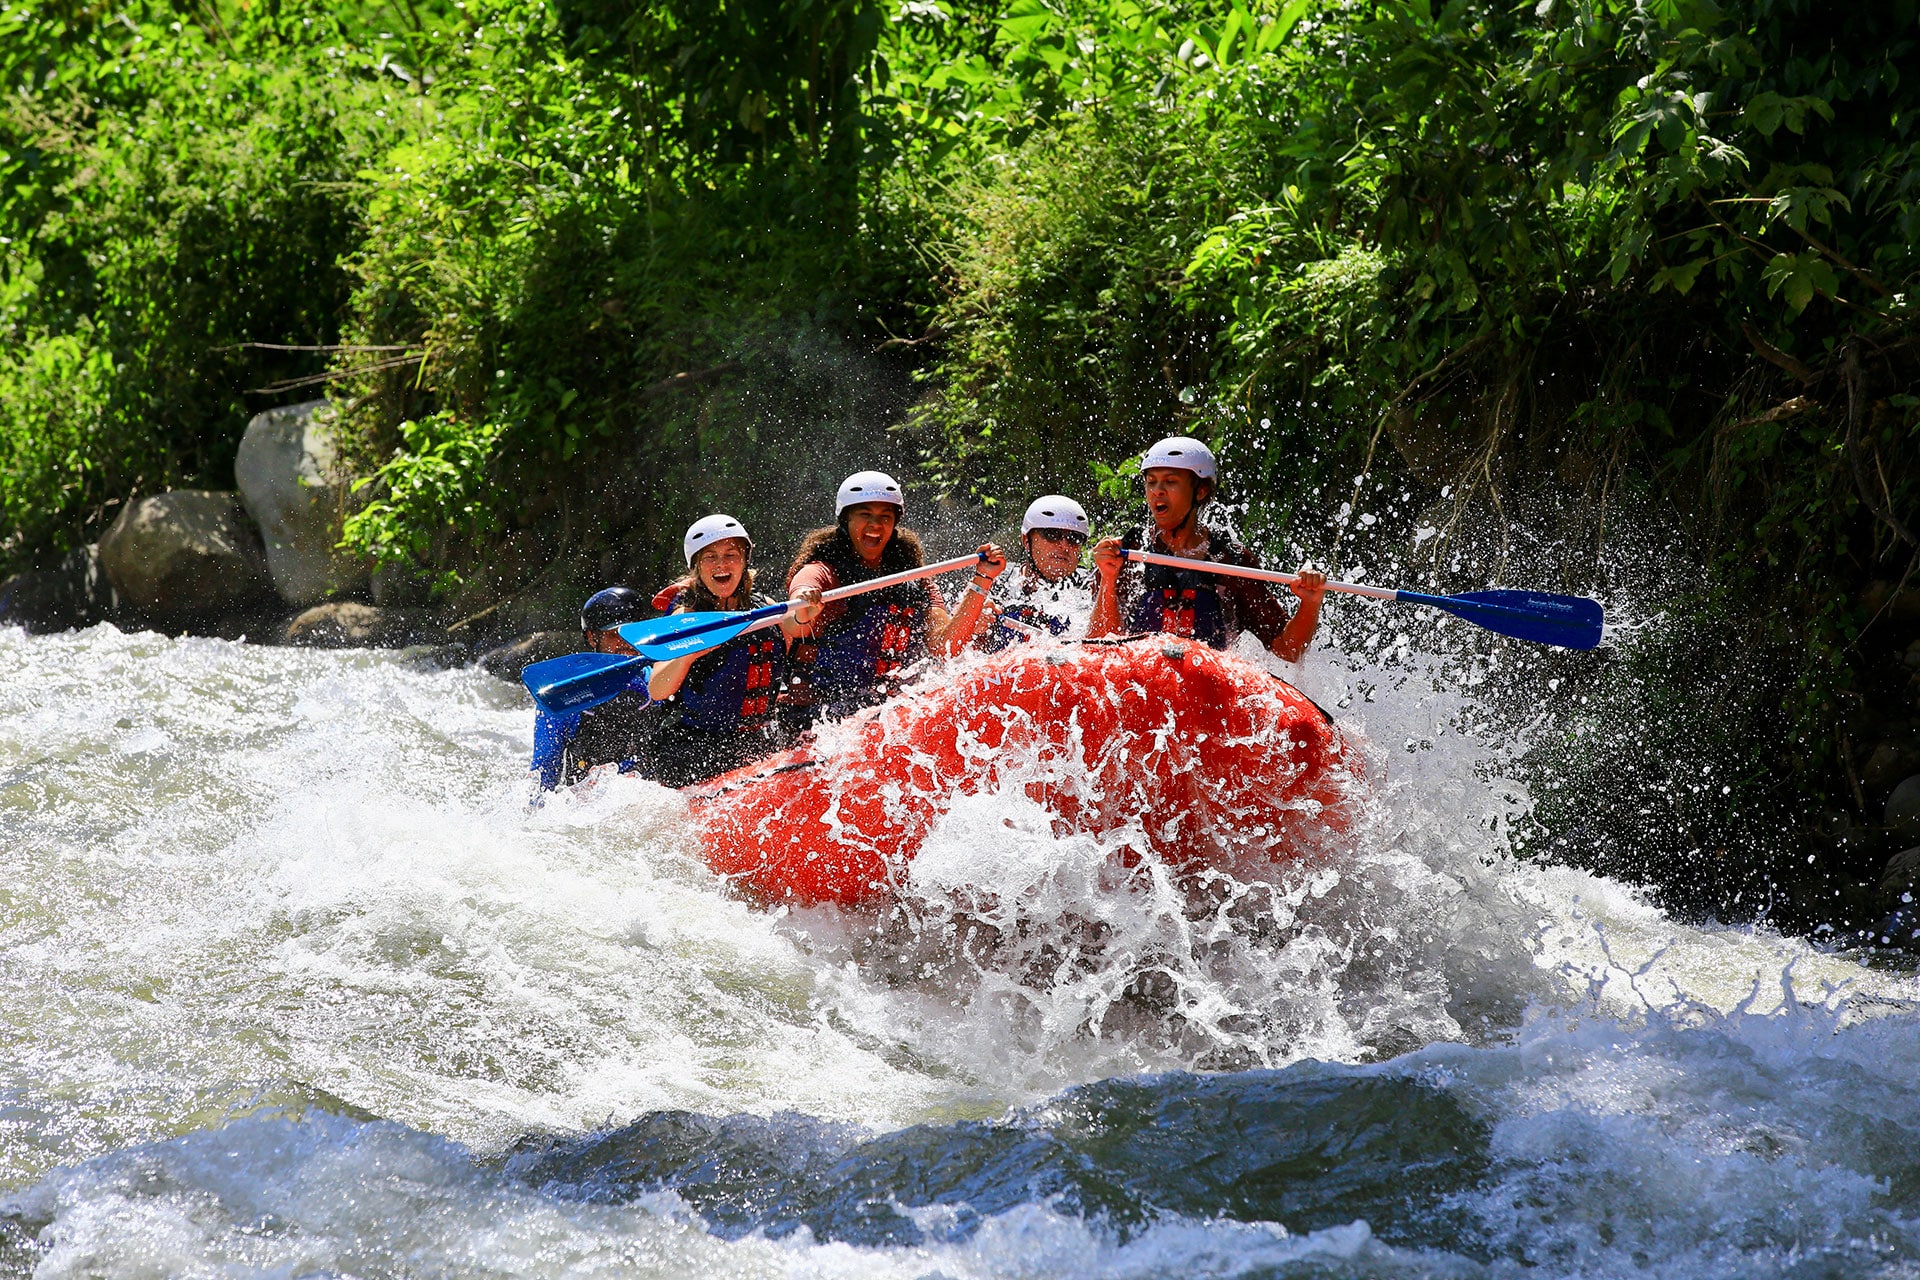 River Rafting in Costa Rica with the Safest and Best Company.